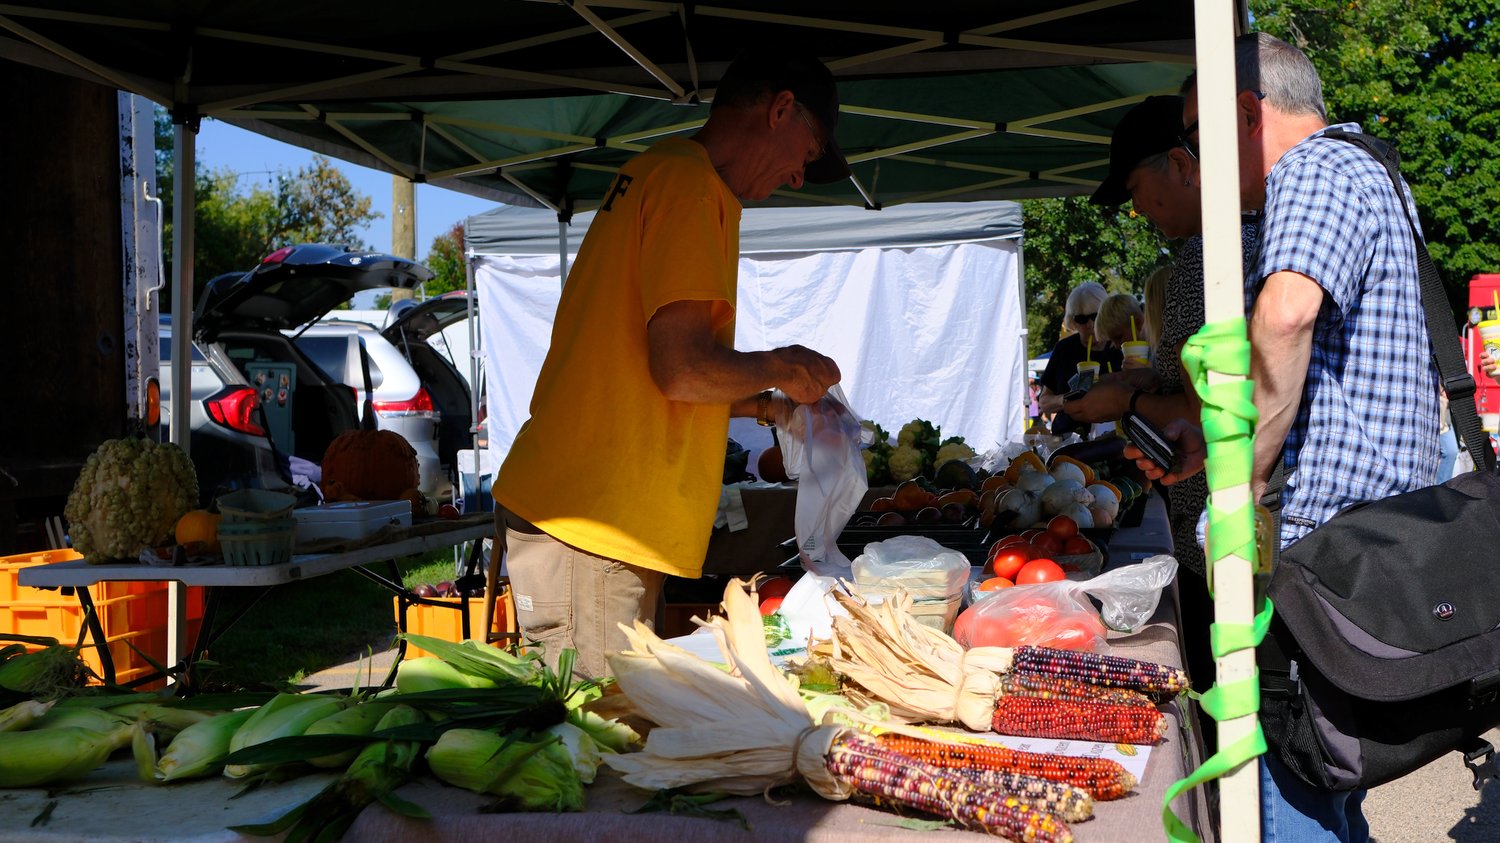 Bagging produce at the farmers market.